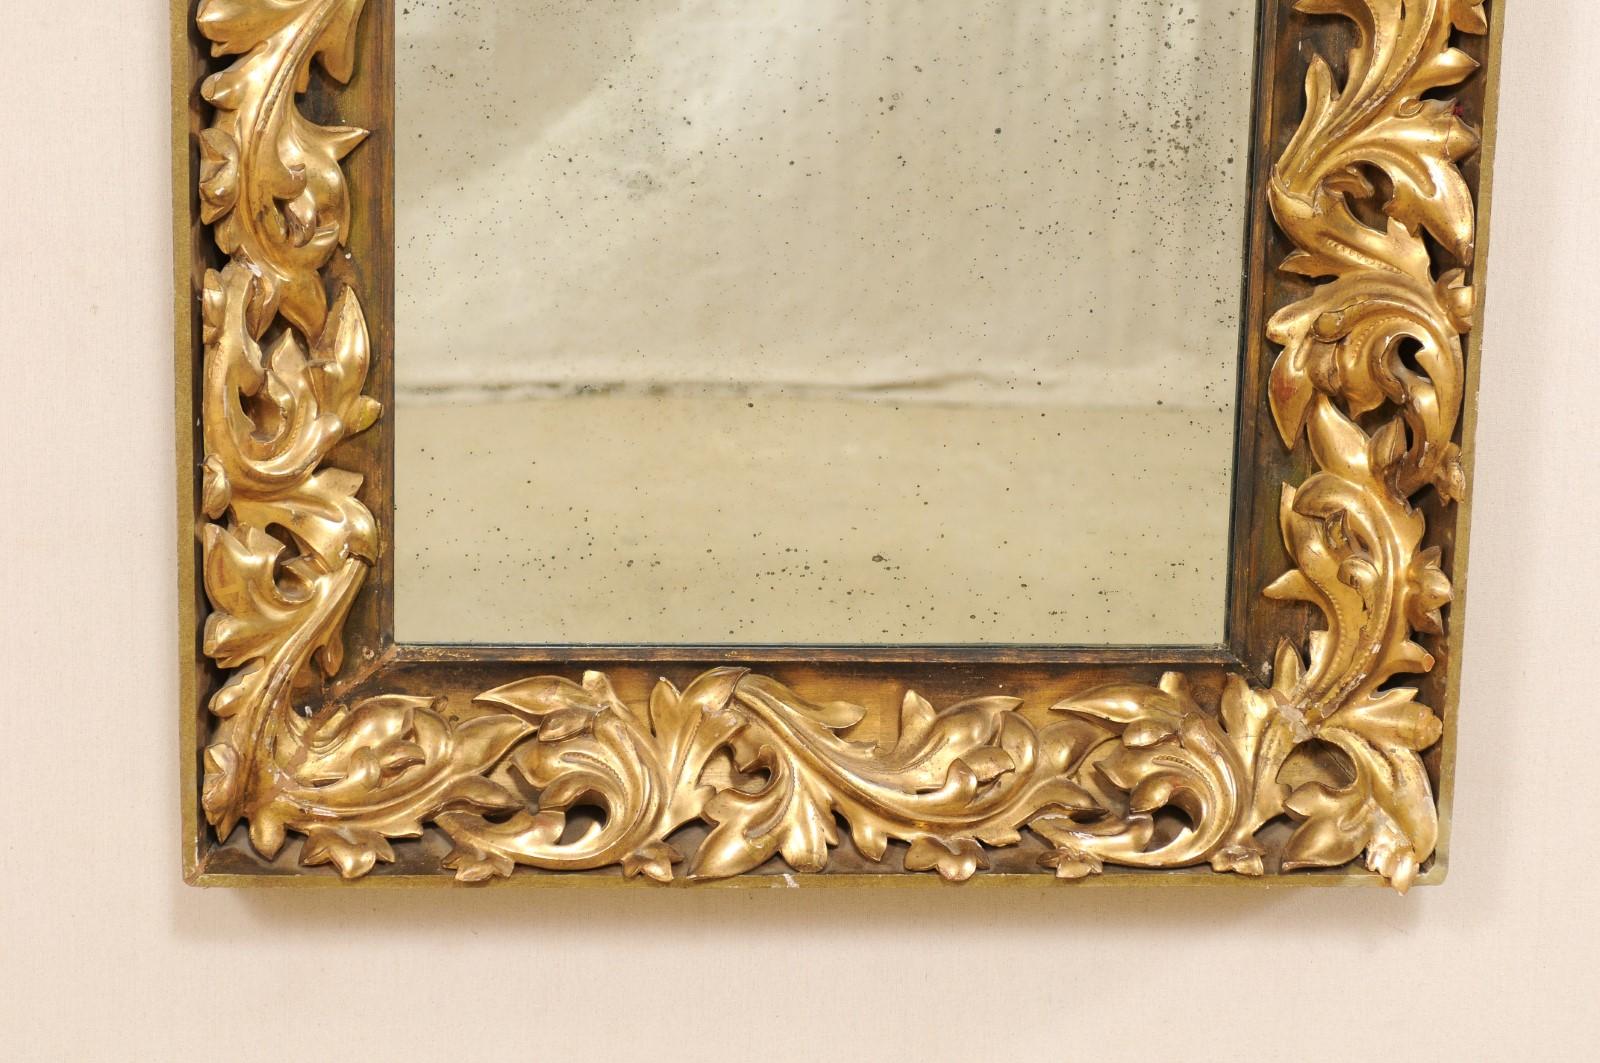 French 19th Century Rectangular-Shaped, Rococo Carved and Giltwood Mirror For Sale 3